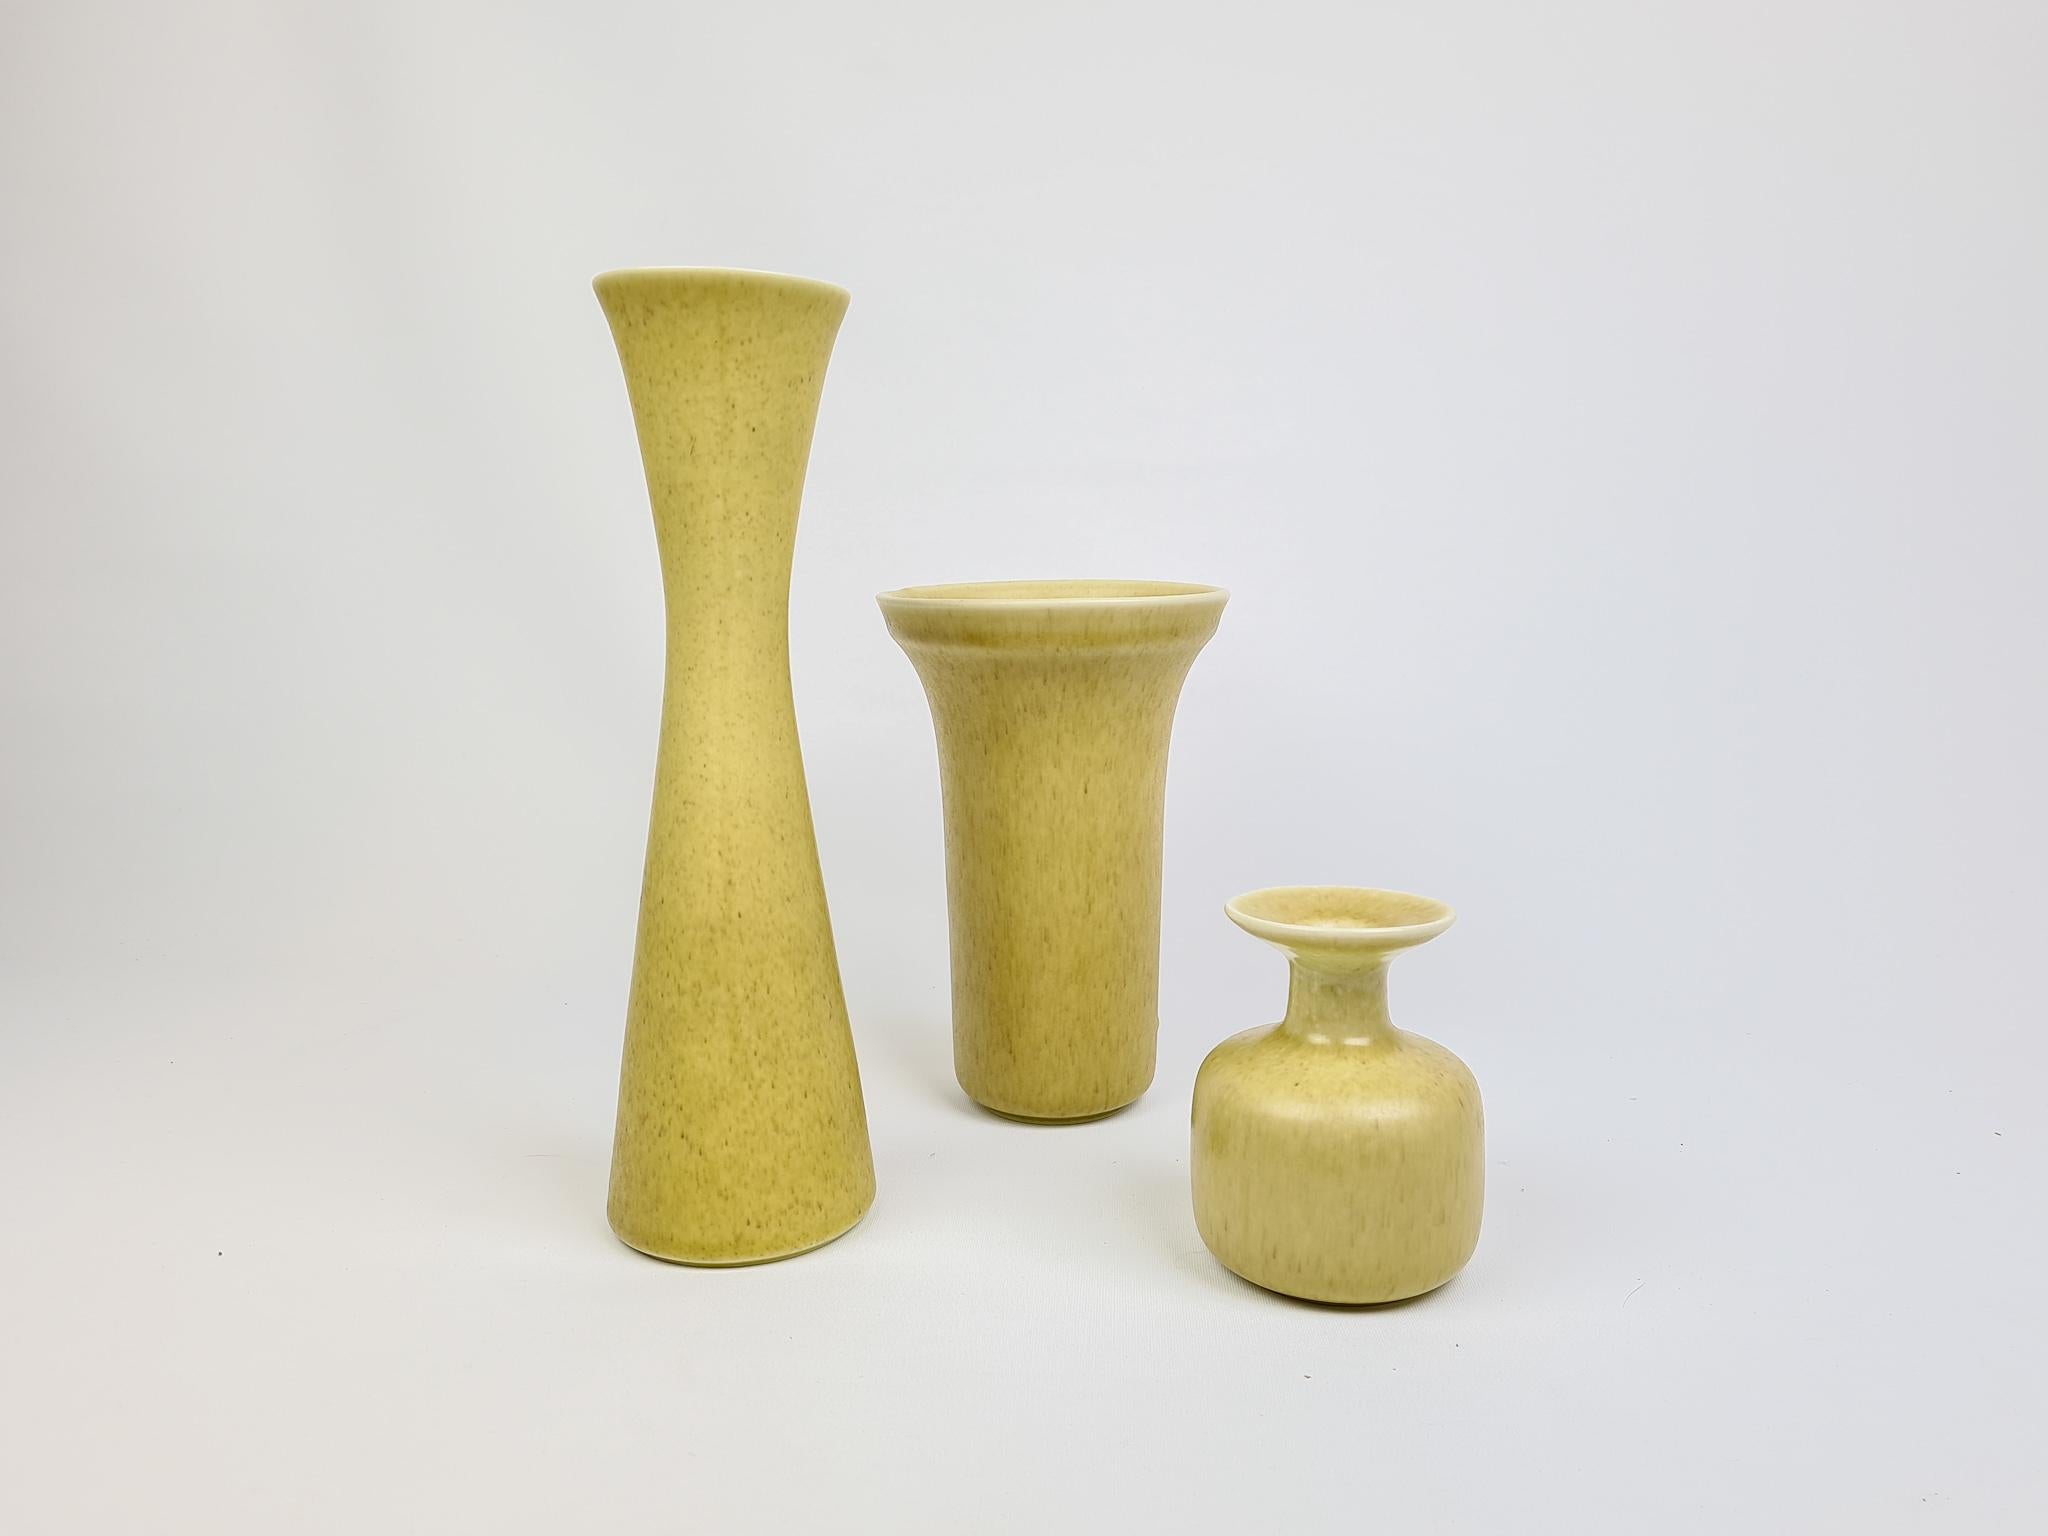 Three wonderful vases from Rörstrand and maker or Designer Gunnar Nylund. Made in Sweden in the midcentury. Beautiful glazed vases in good condition.

Measures: Height 26 cm, 17 cm and 10 cm.